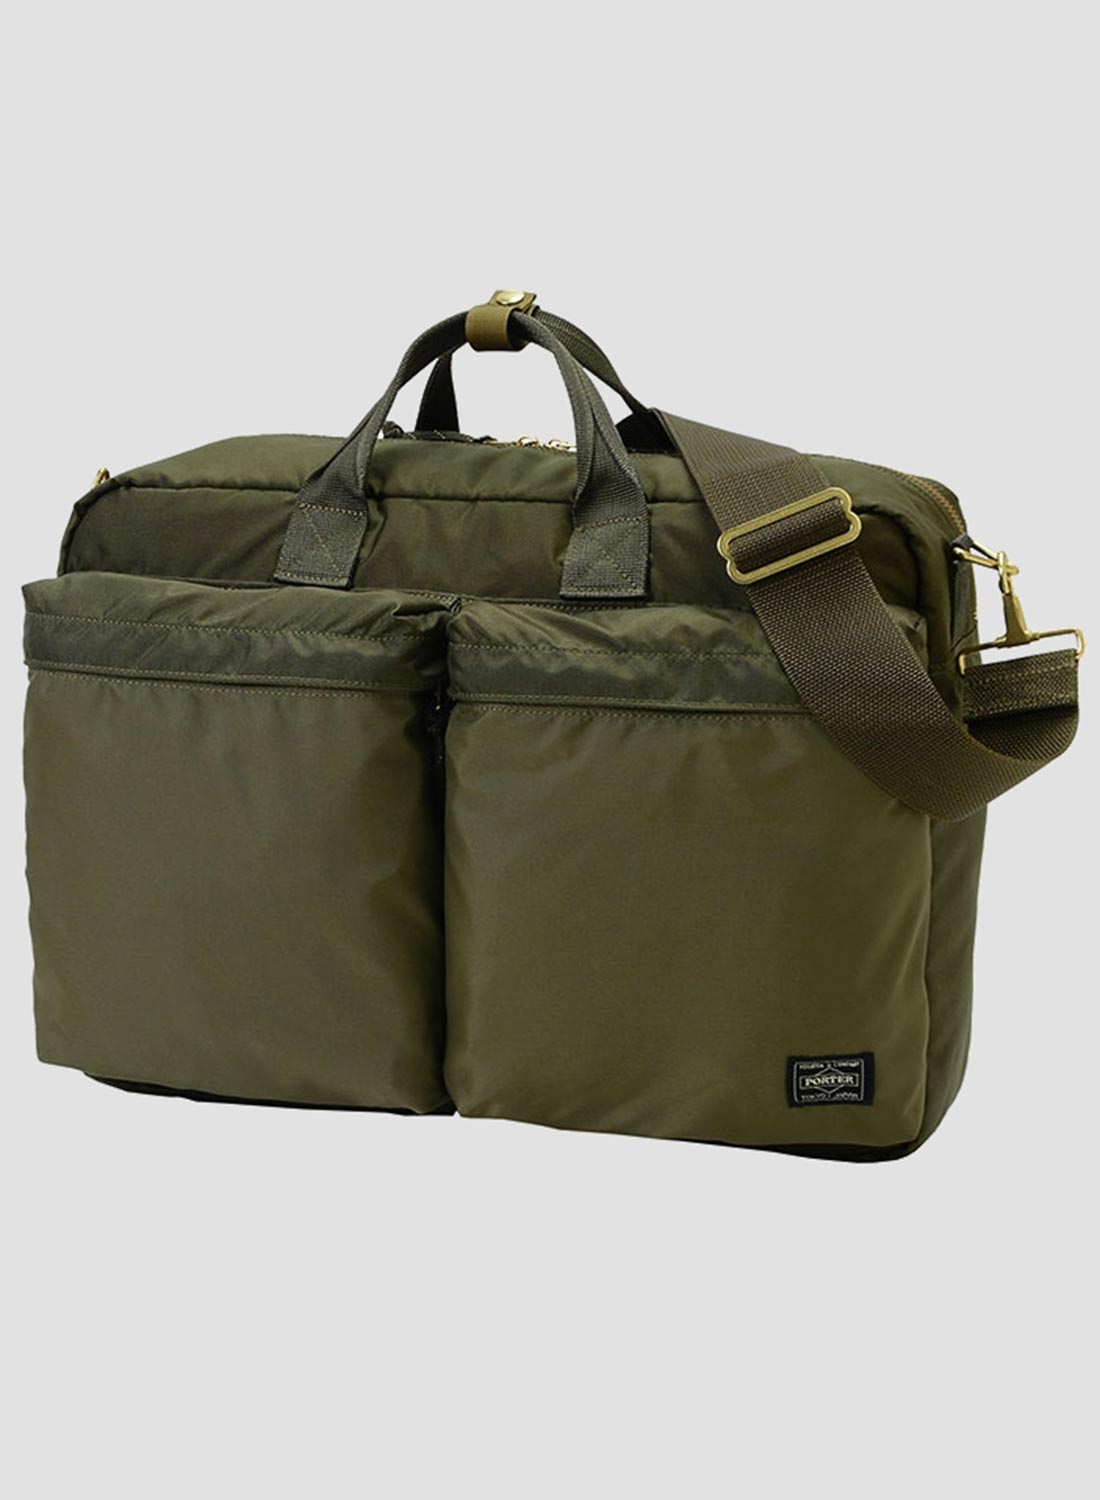 Porter-Yoshida & Co Force 3Way Briefcase in Olive Drab - 1